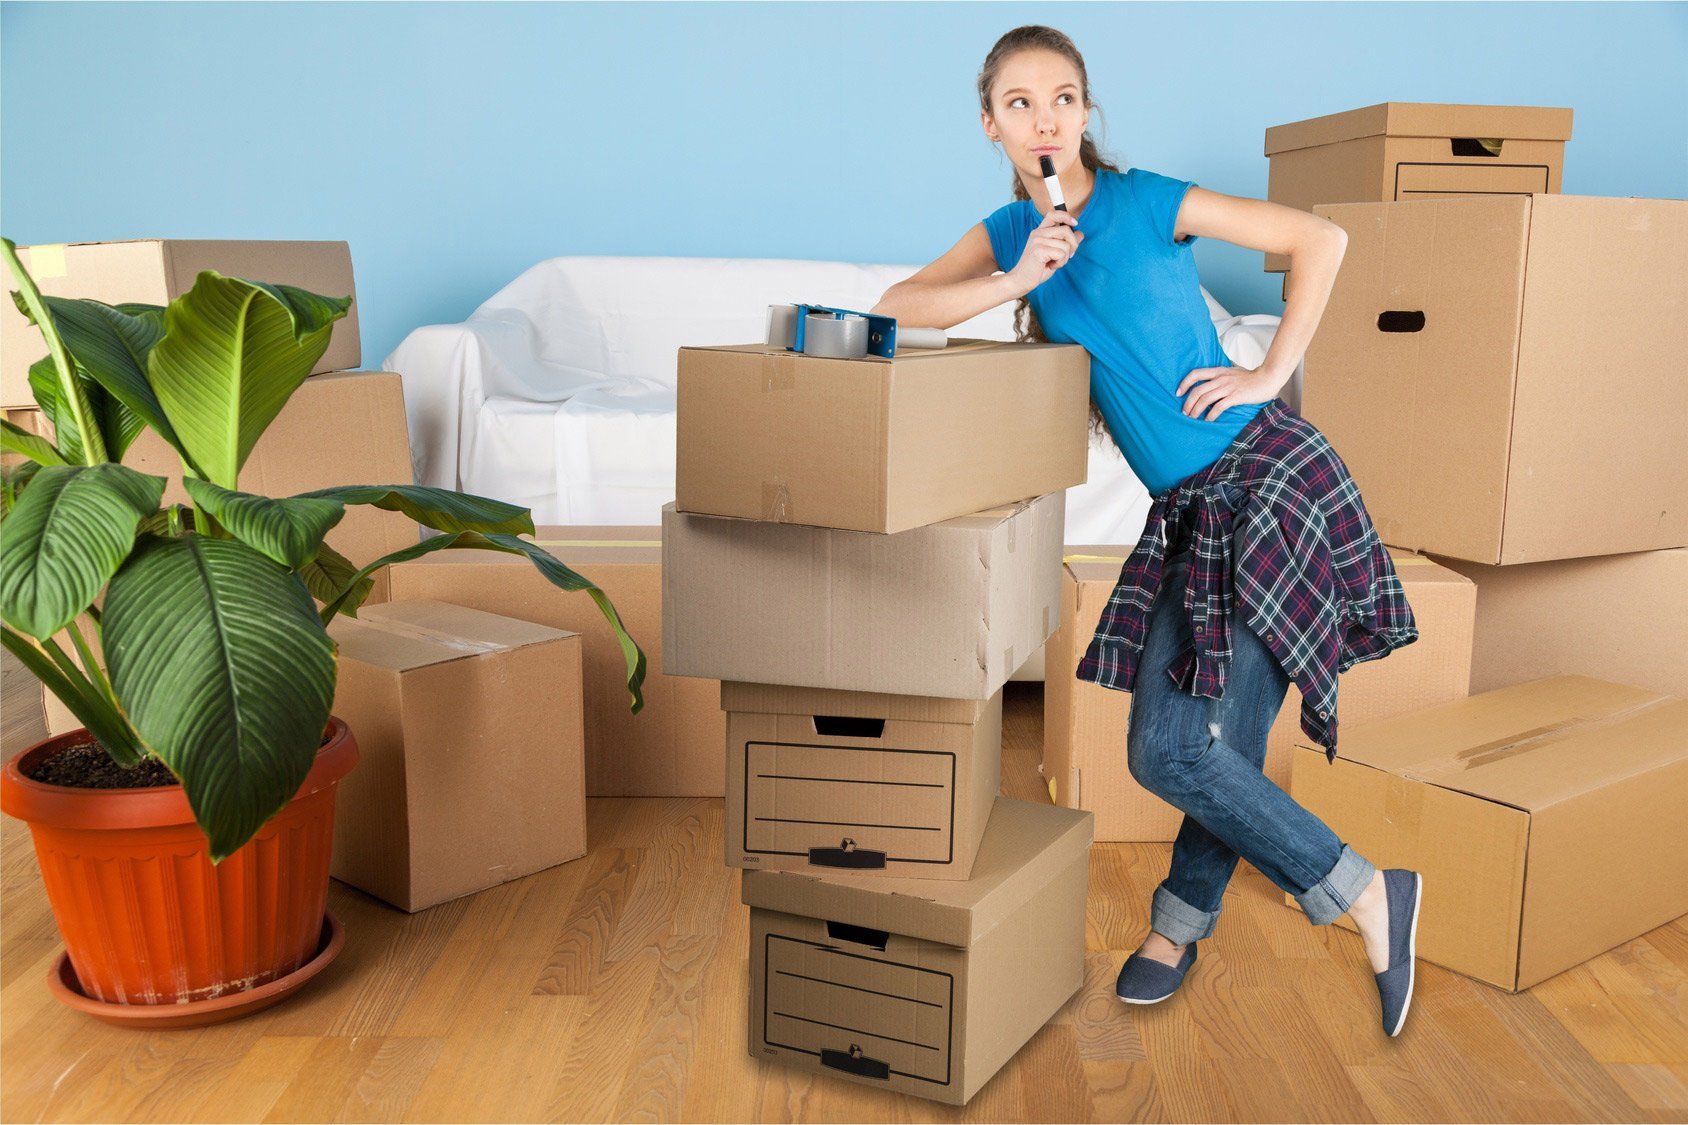 A woman is standing next to a pile of cardboard boxes in a living room.